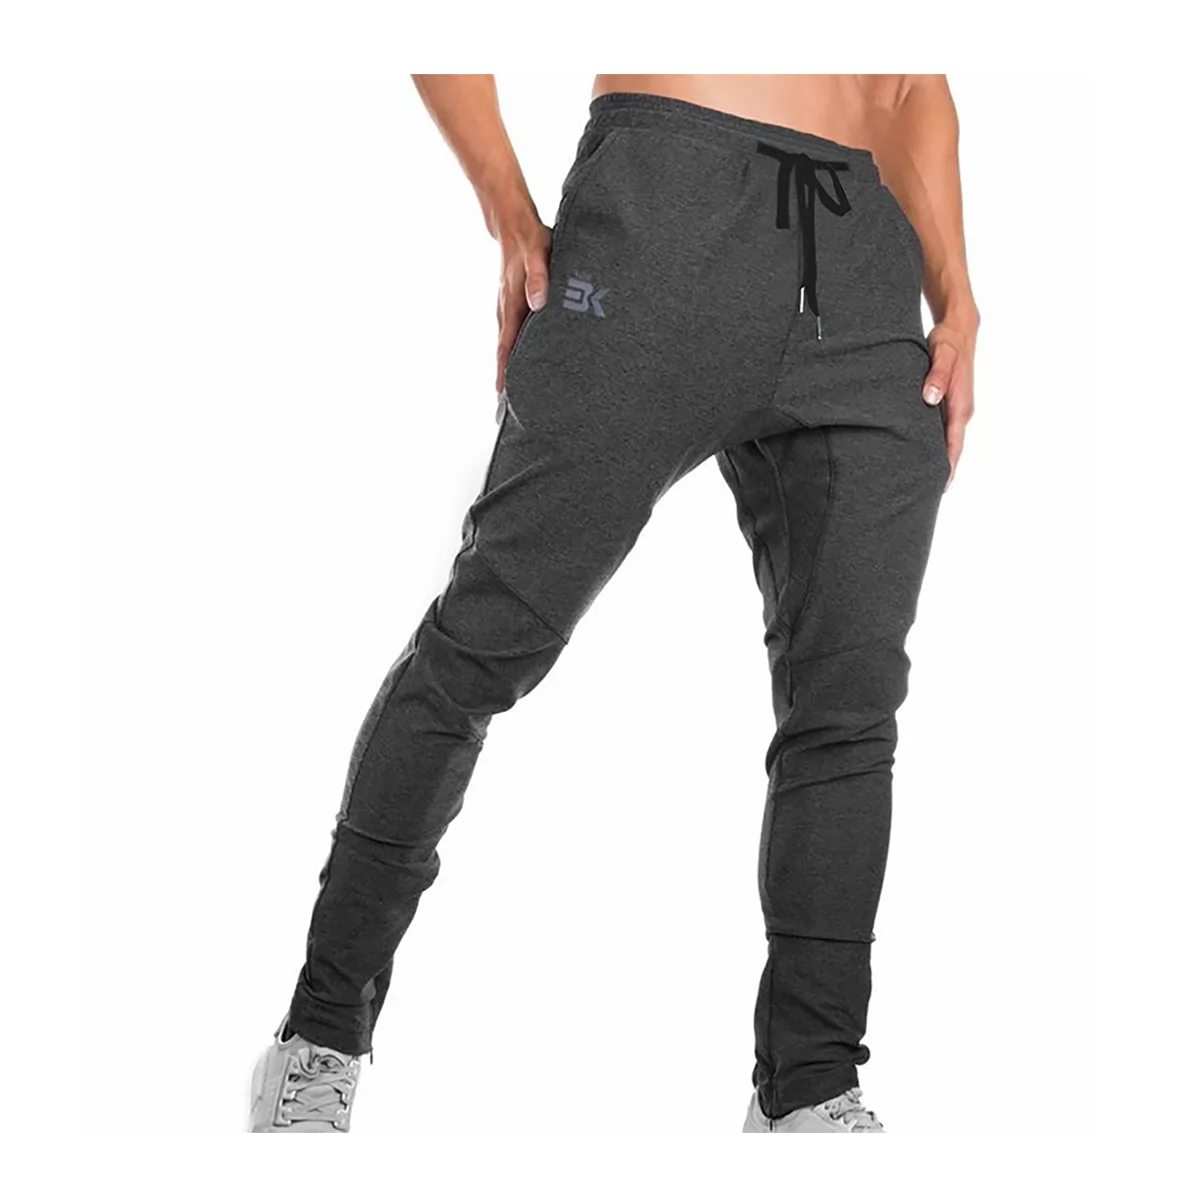 Double Pocket Training Trousers